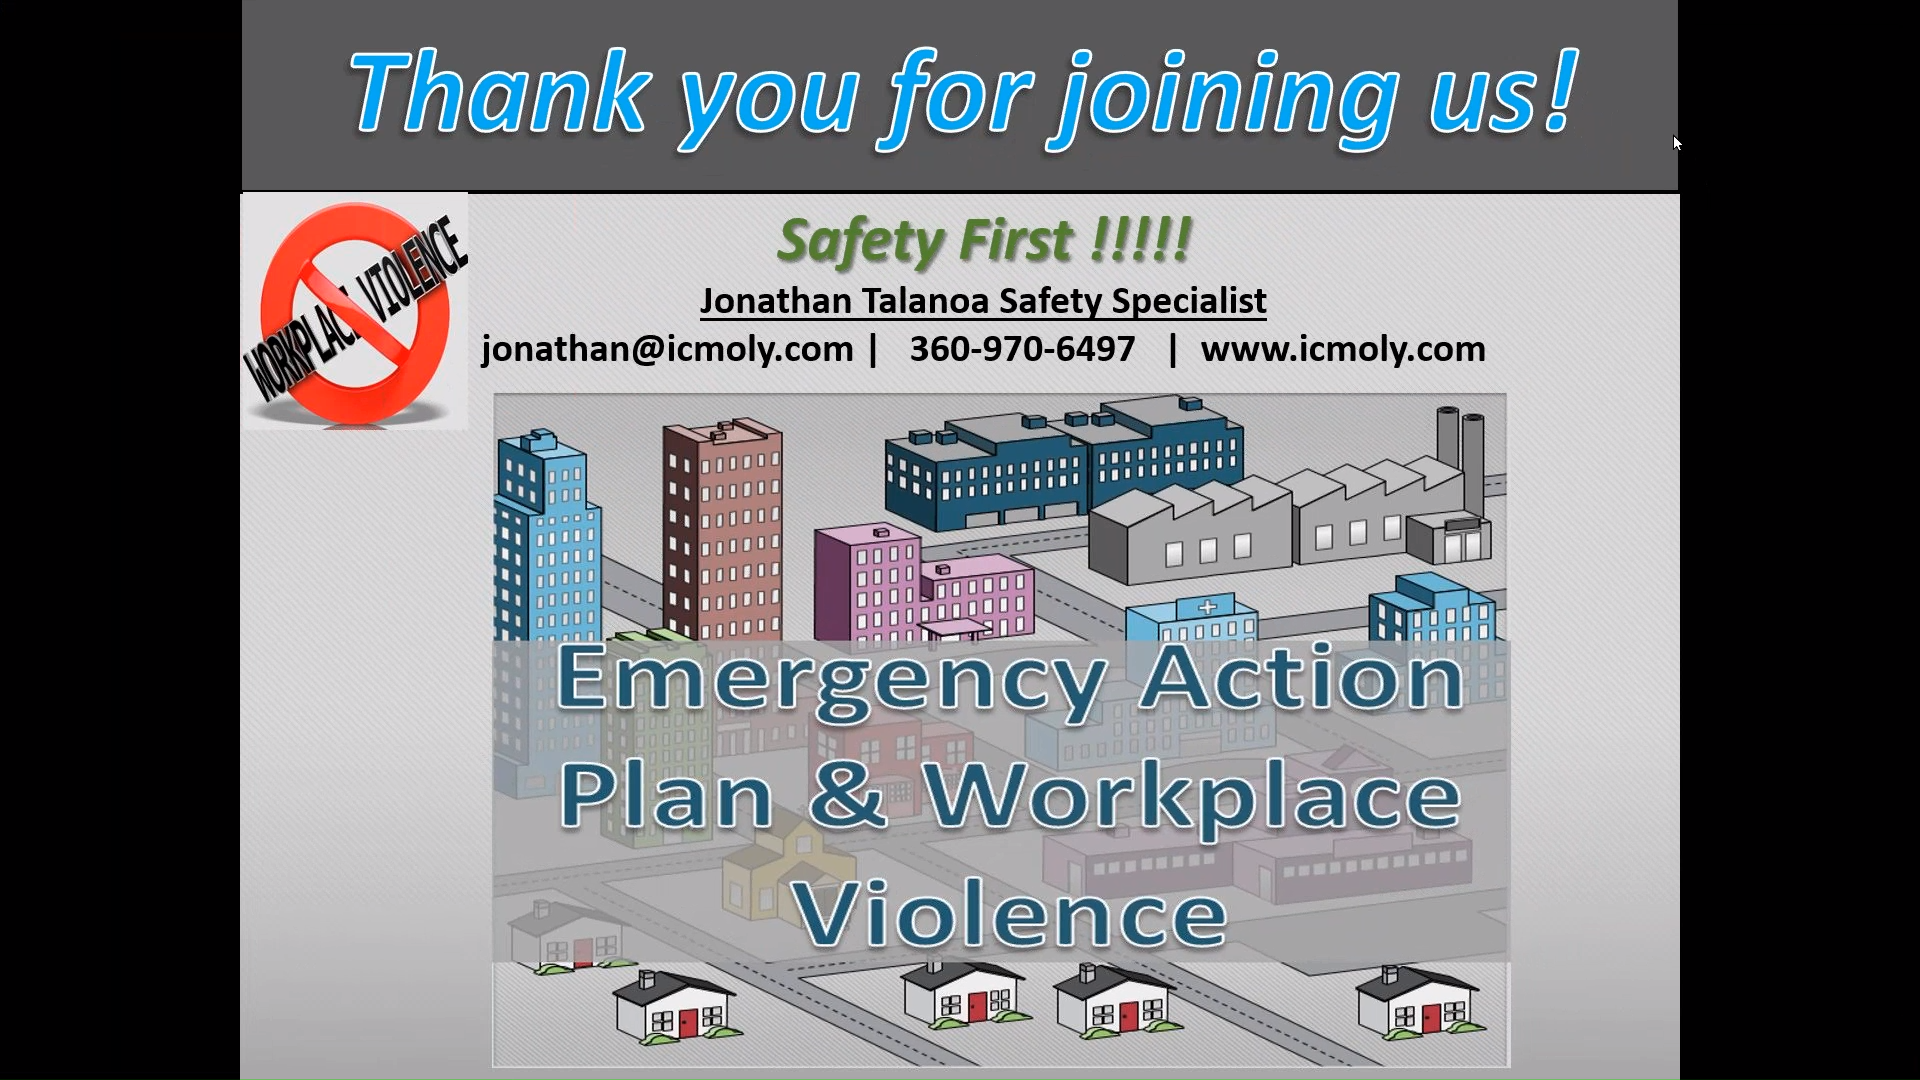 Title screen for the workplace violence and emergency action plan webinar 2022